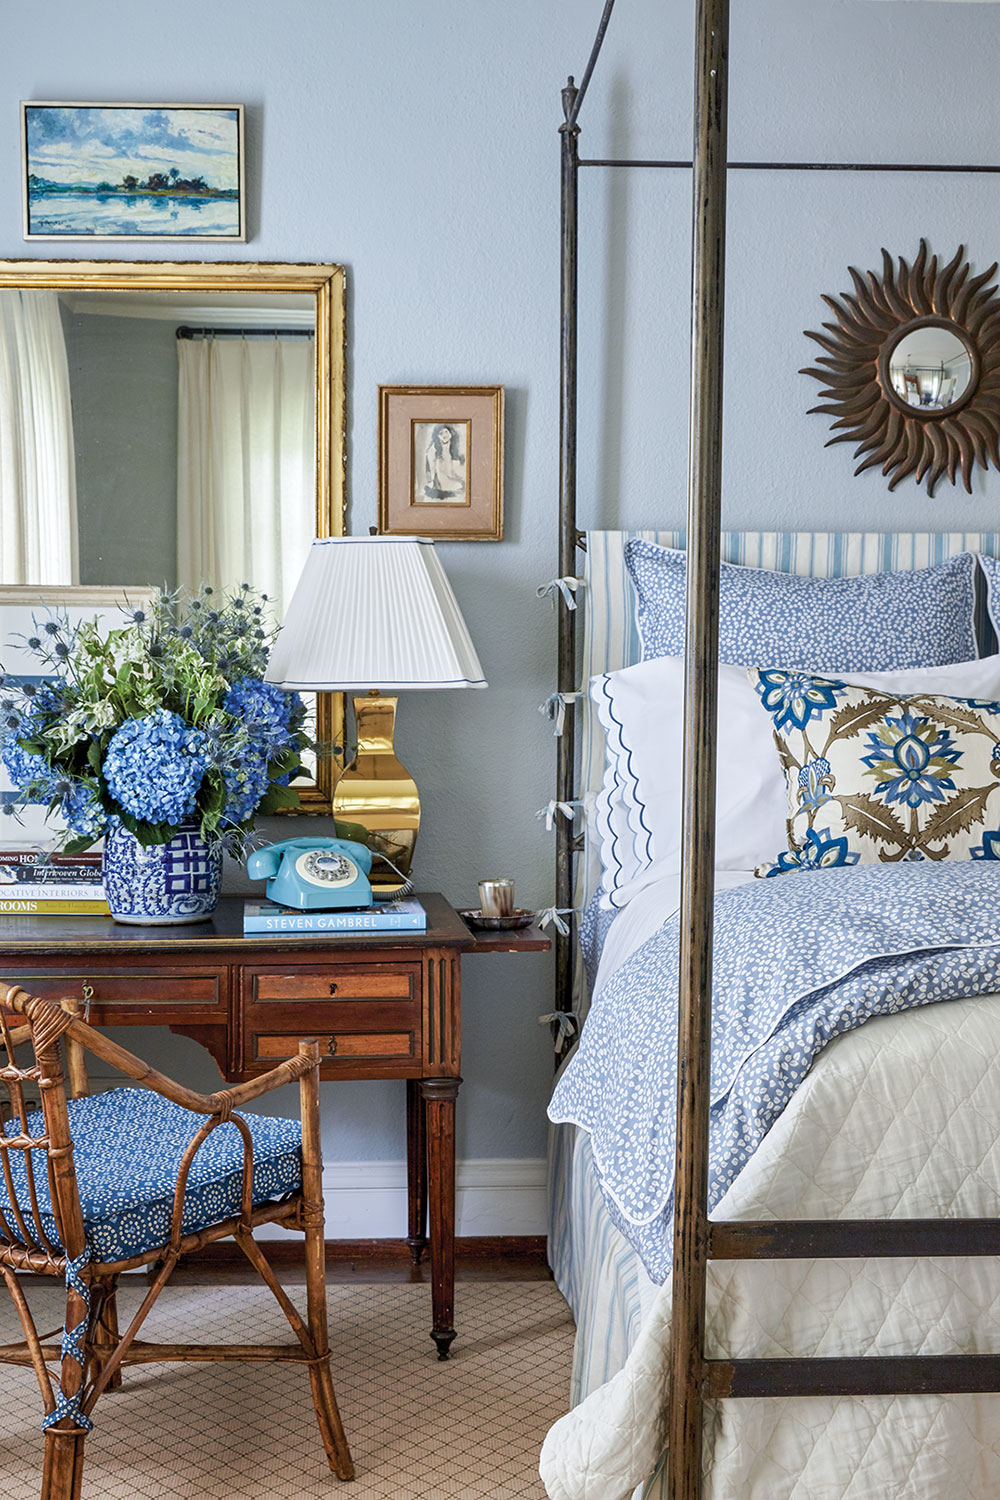 A desk and chair beside a four-poster bed is decorated with a large arrangement of hydrangeas, a vintage-inspired blue phone with rotary dial, a brass lamp, and large rectangular mirror with a brass frame. The walls are painted a pale blue